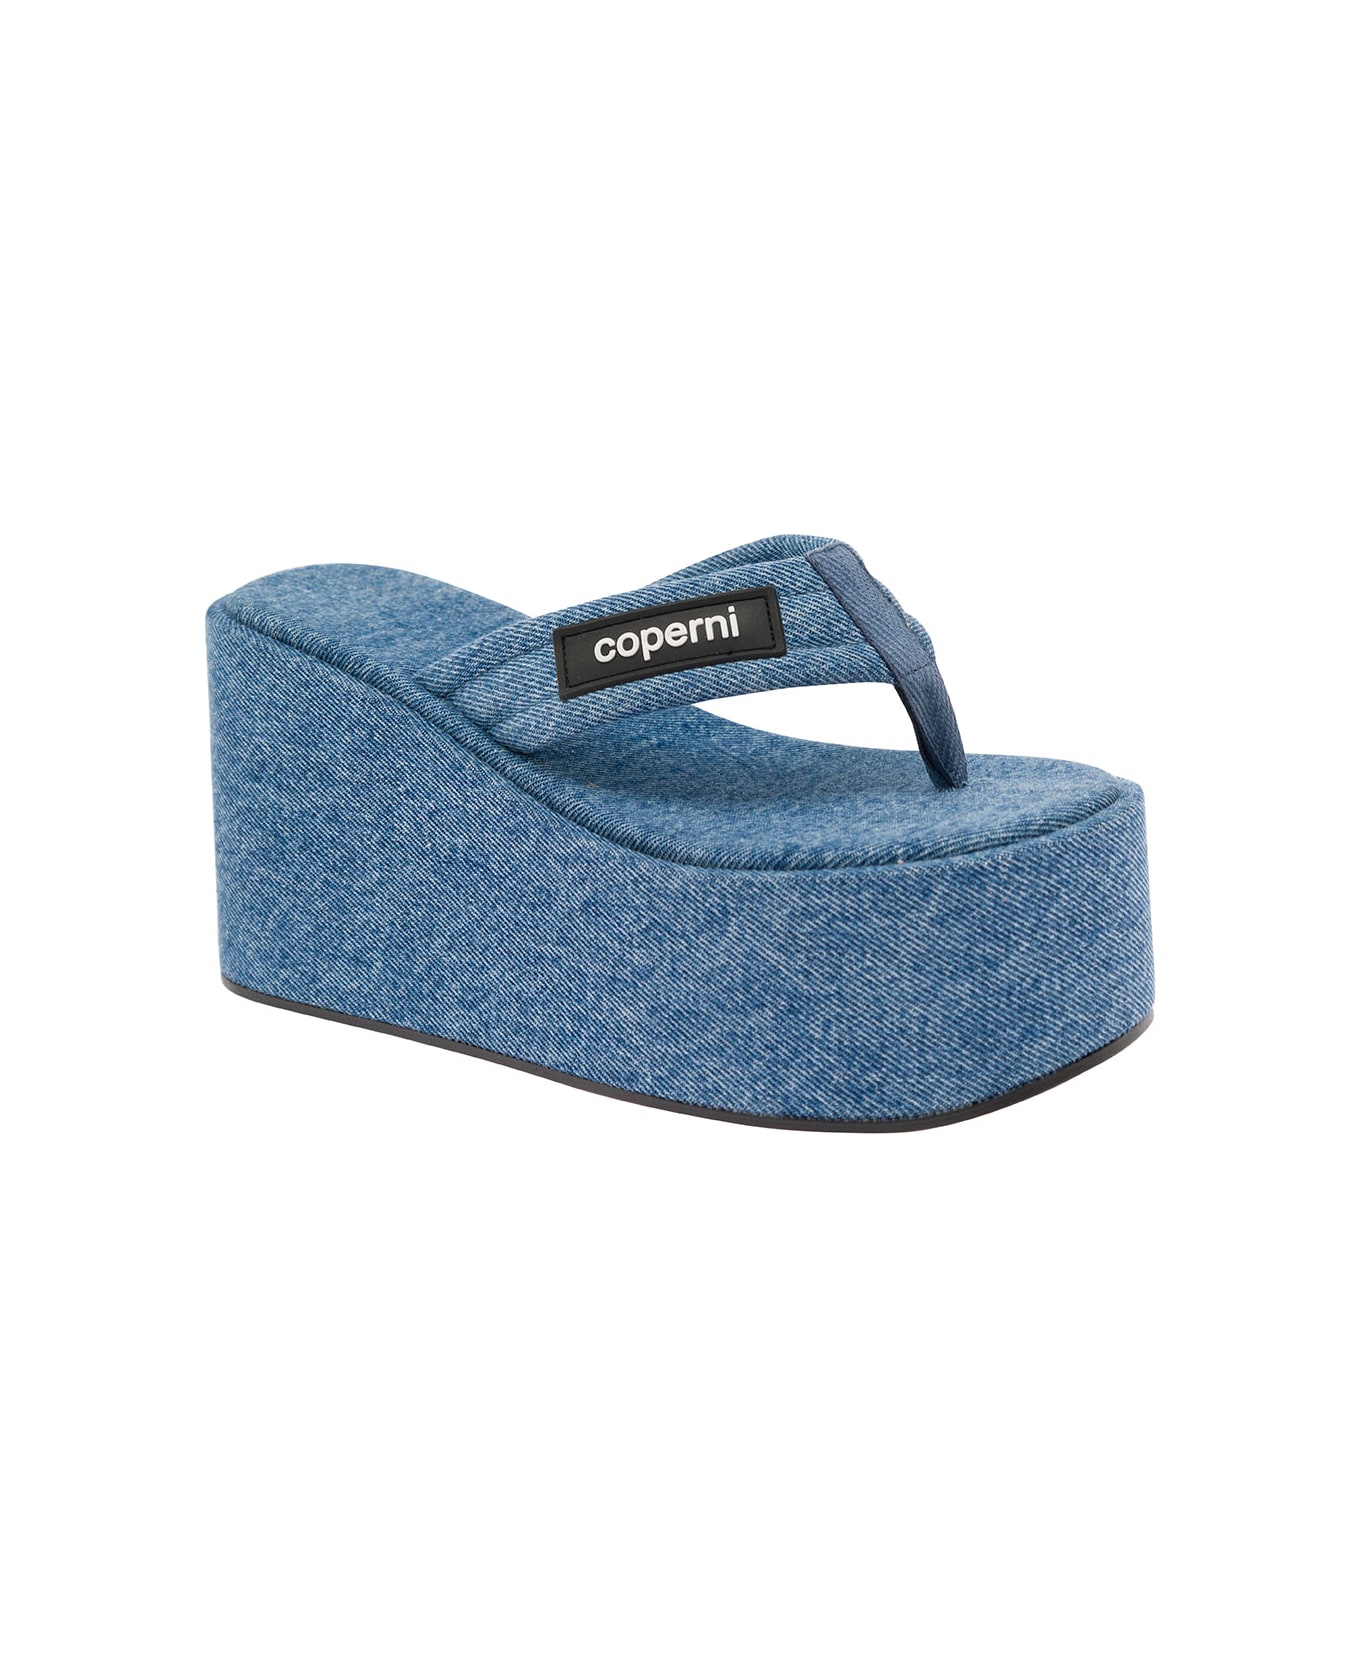 Coperni Light Blue Sandals With Wedge And Logo Patch In Denim Woman - Blu